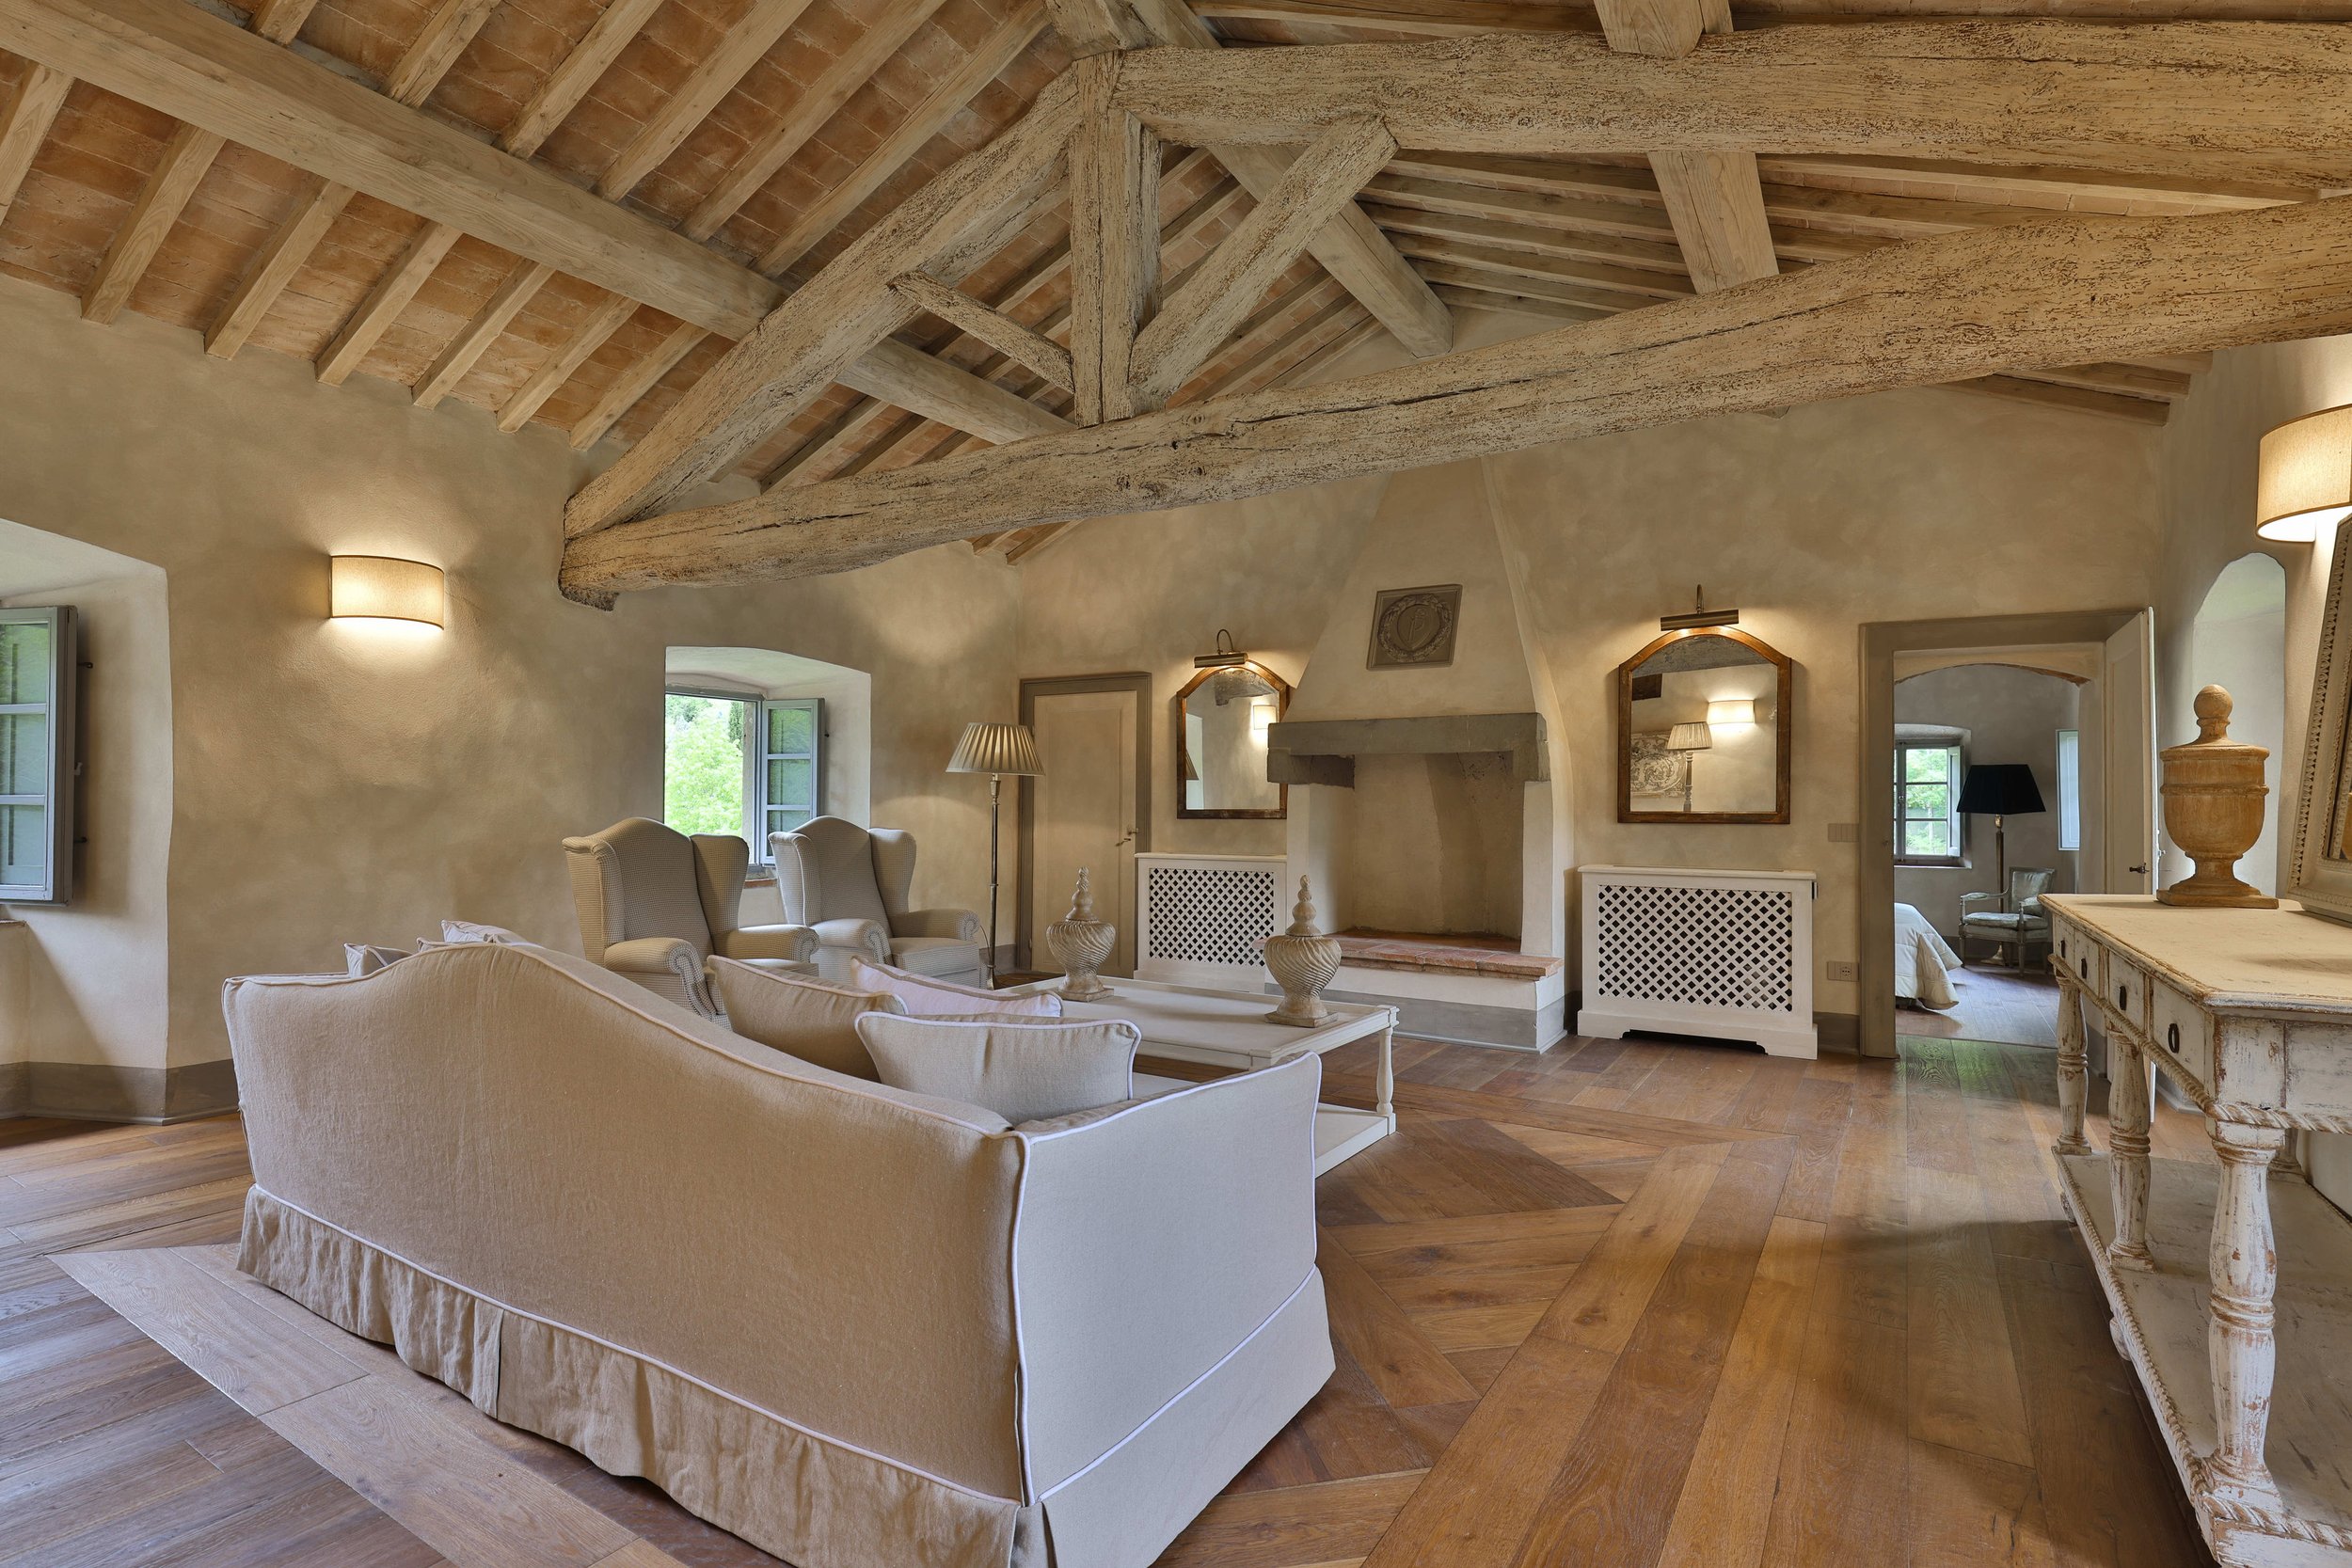 Francis York NEW Luxury Holiday Rental in the Chianti Hills, Tuscany Booking This Summer  18.jpg